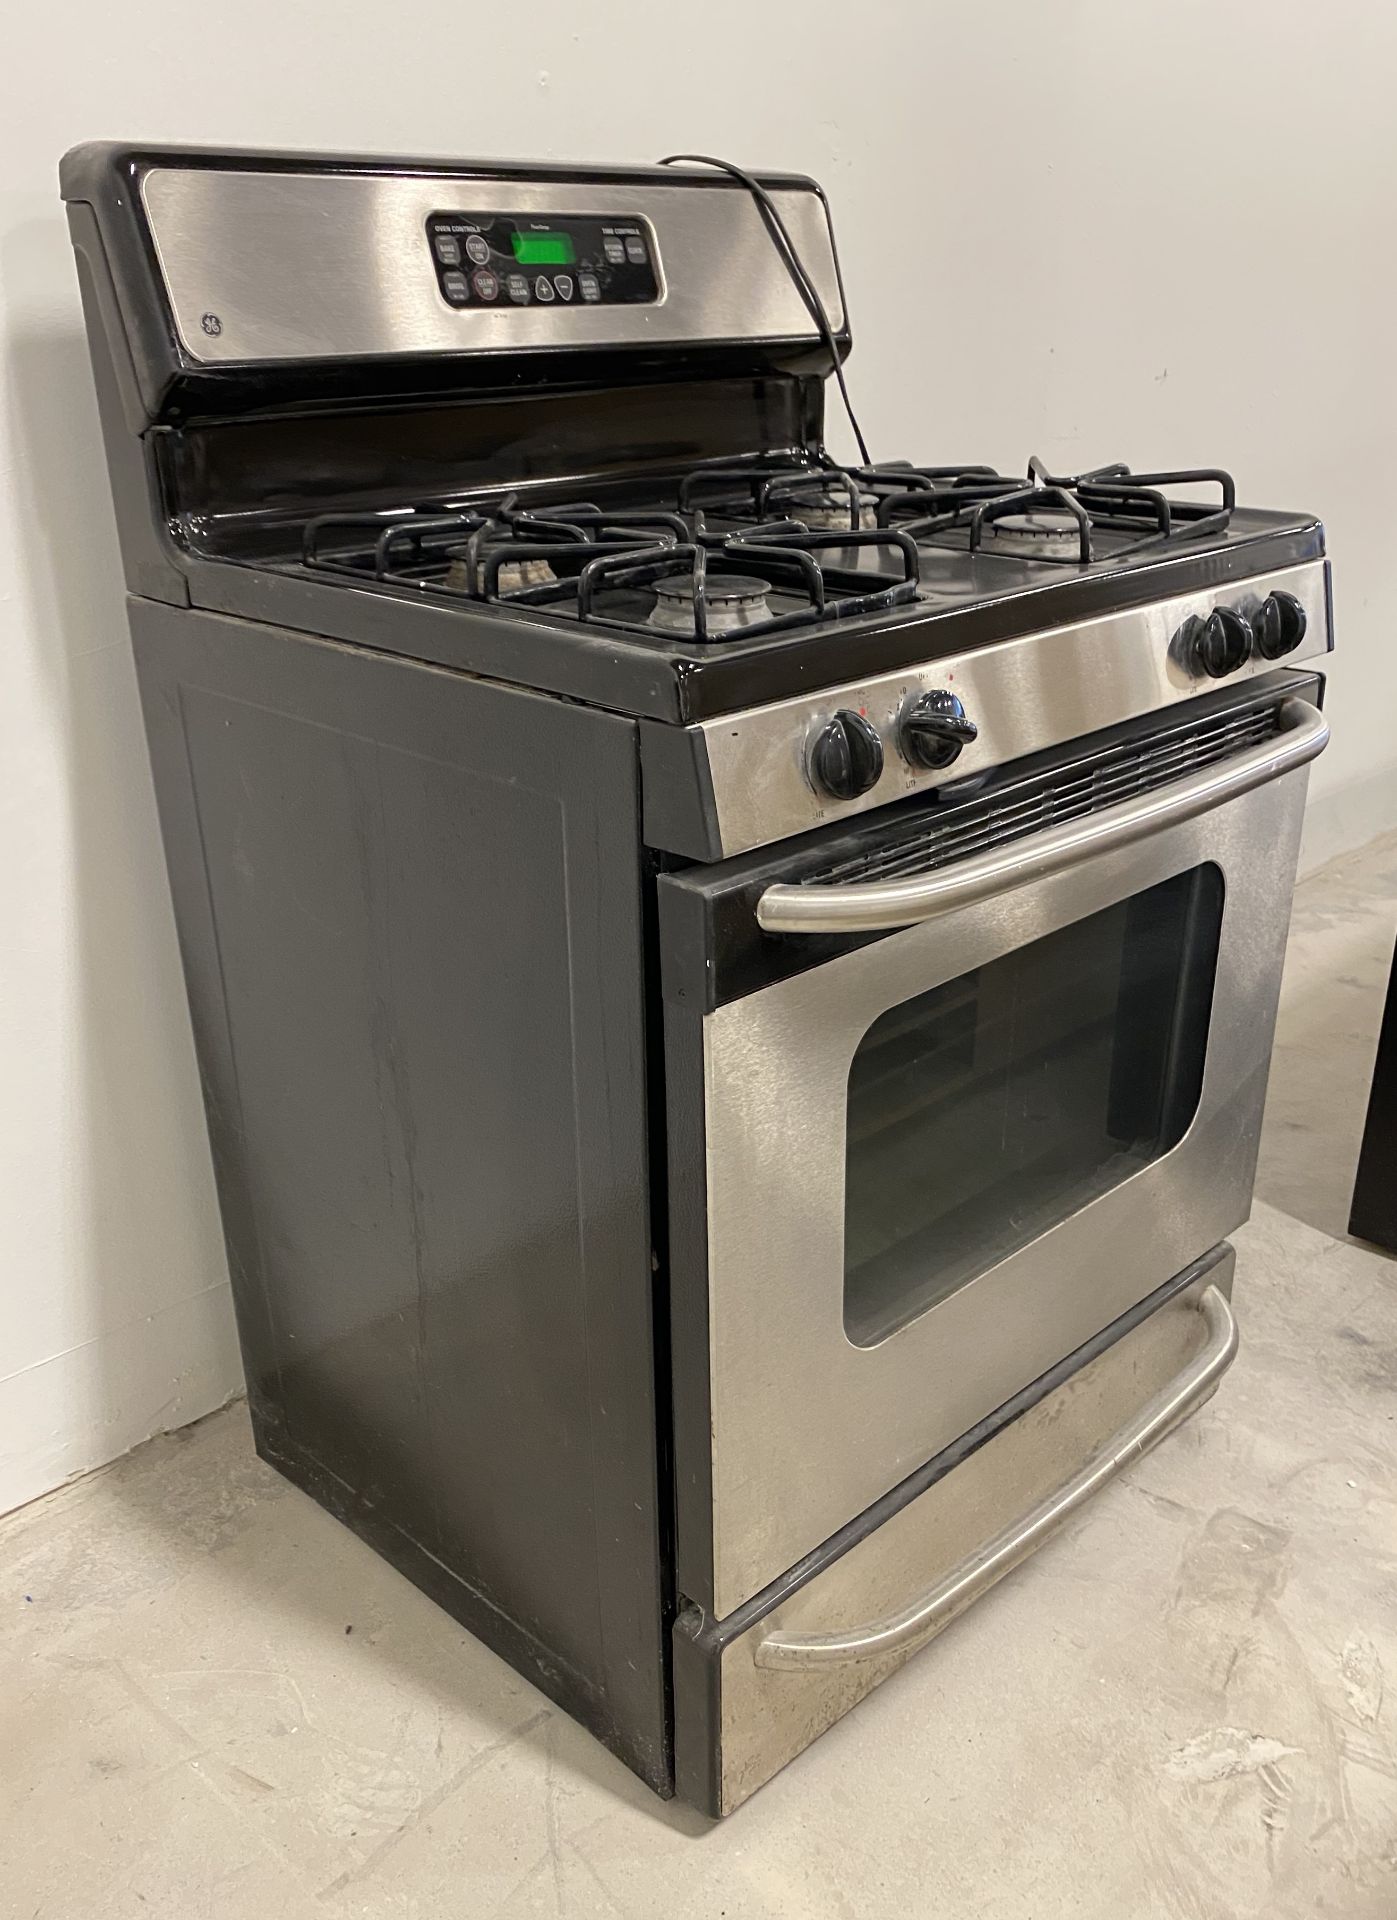 GENERAL ELECTRIC GE RESIDENTIAL OVEN RANGE UNIT - Image 2 of 5